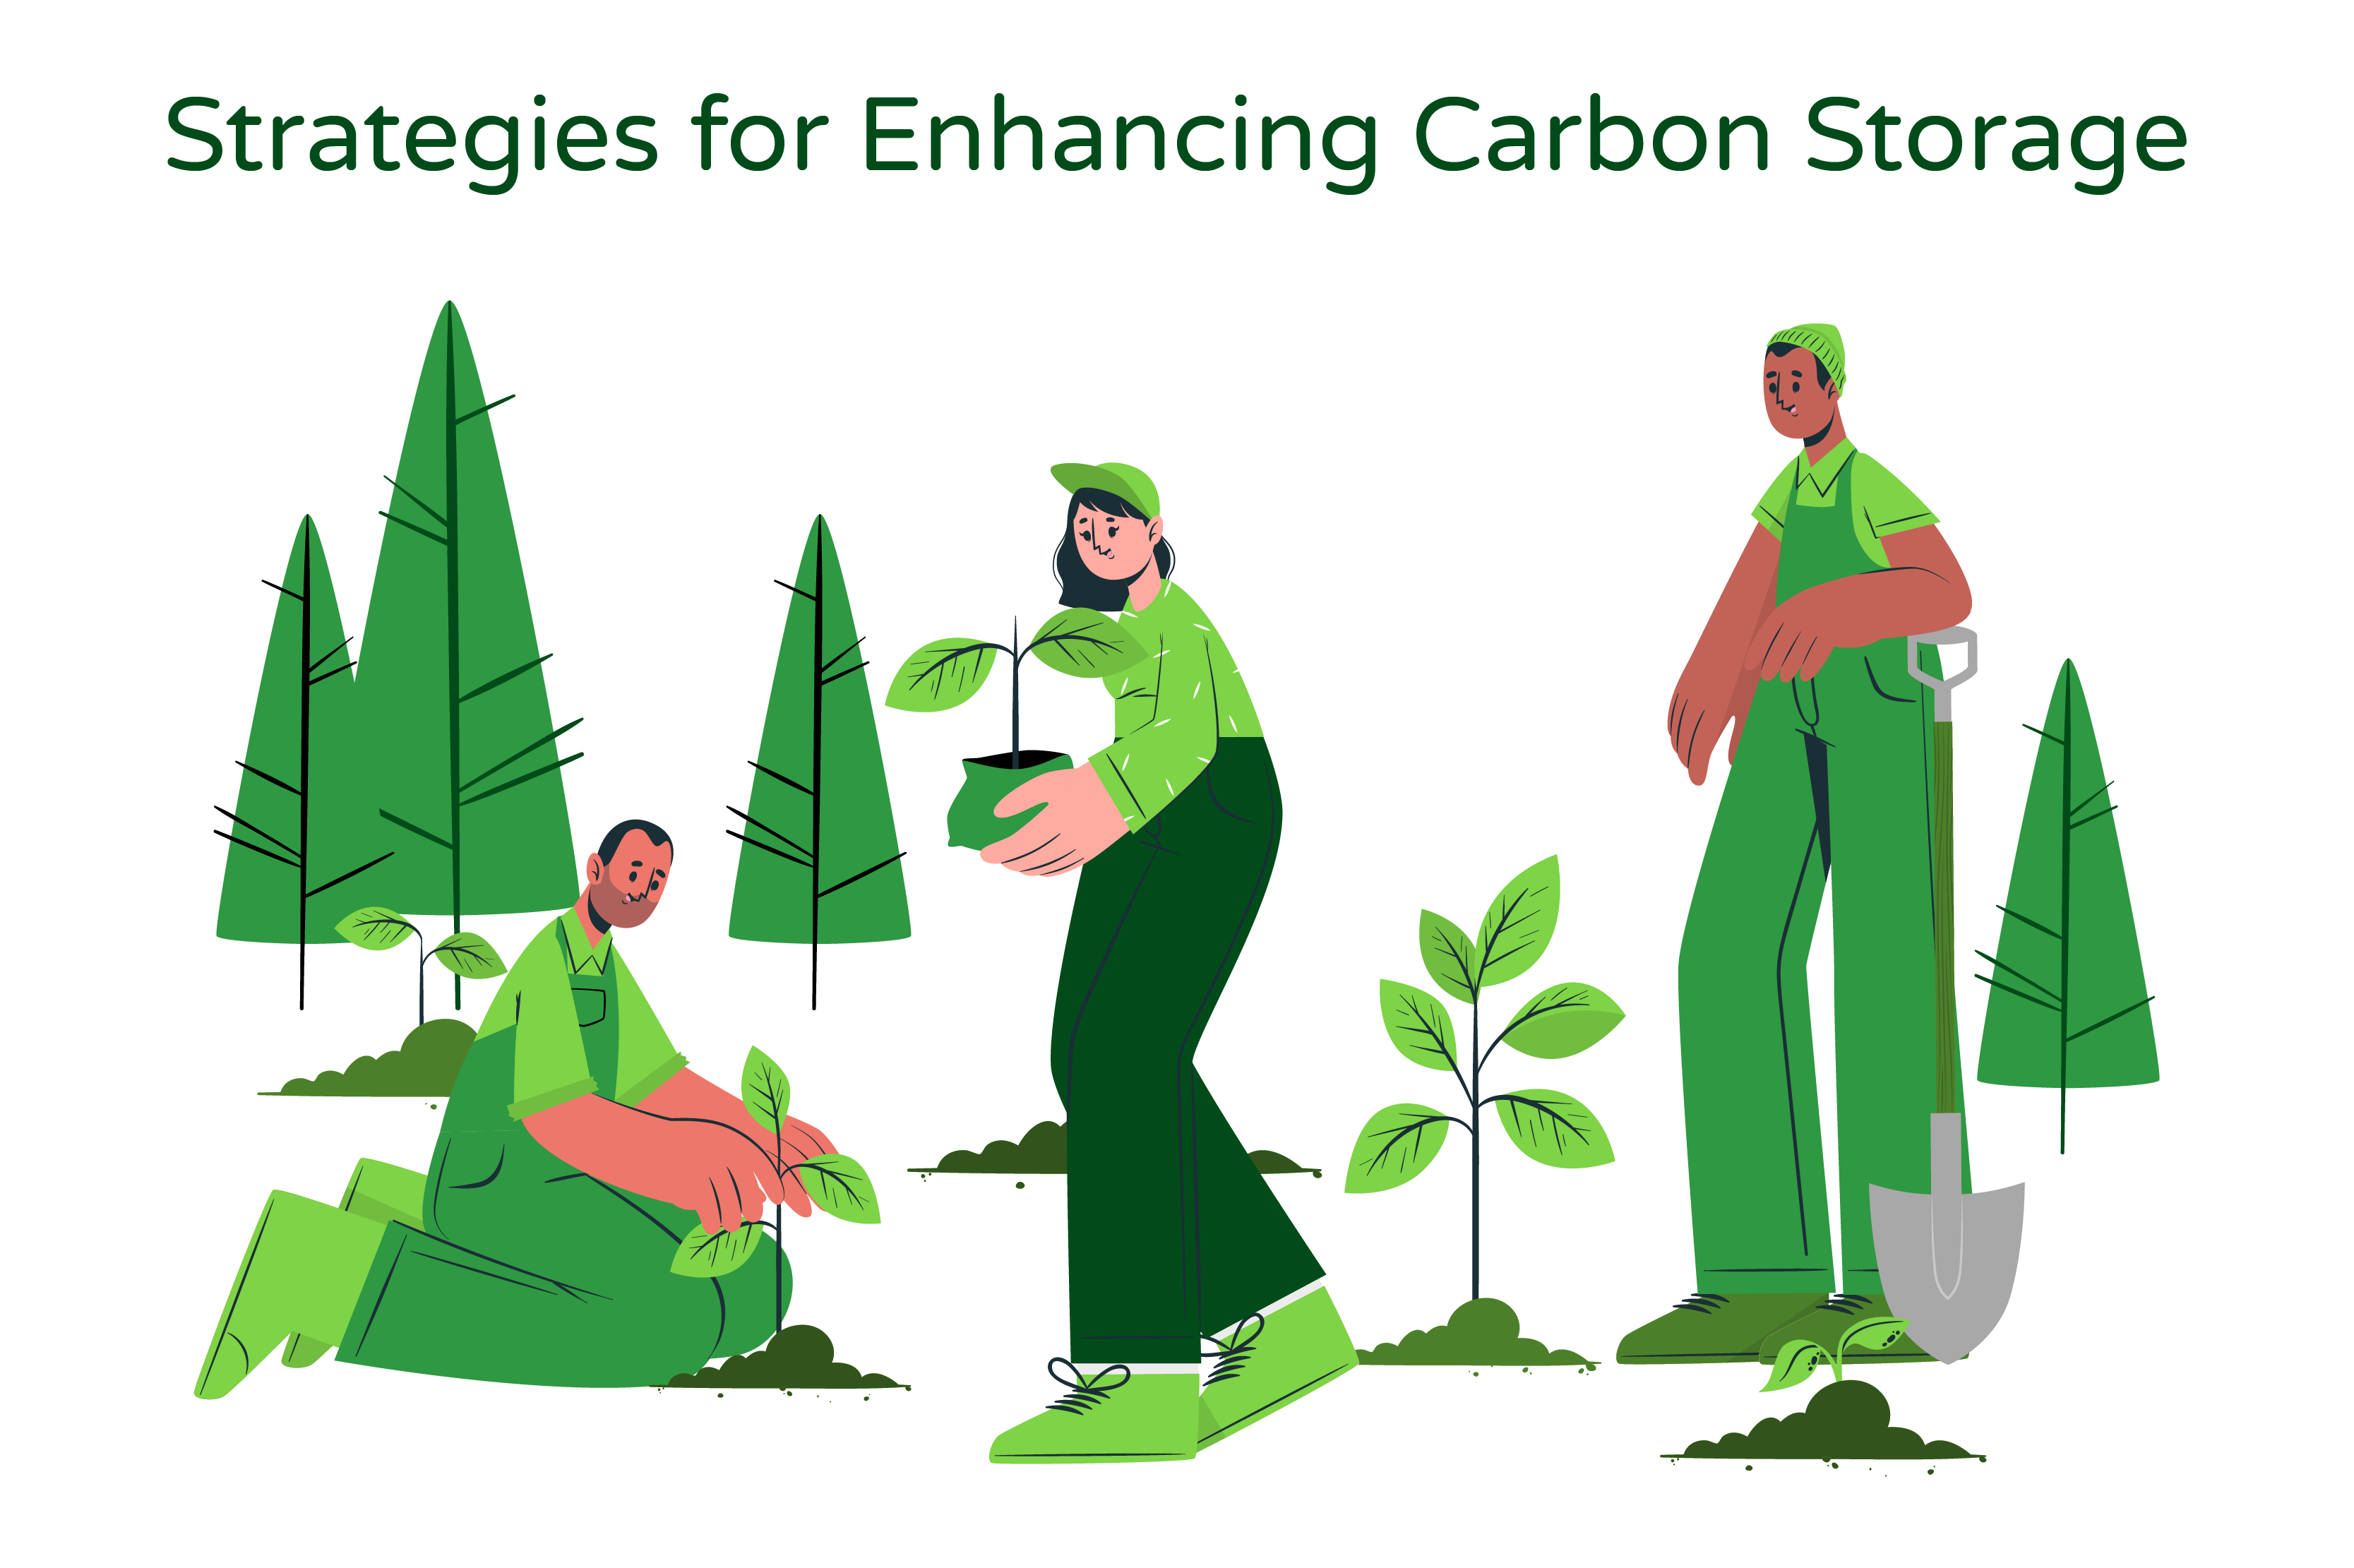 Illustration titled 'Strategies of Enhancing Carbon Storage' showcases three individuals actively engaged in growing plants, aligning with the concepts discussed in the accompanying paragraph.  The illustration emphasizes the importance of forests in storing carbon dioxide (CO2) from the atmosphere. The first person is depicted amidst an old-growth forest, highlighting the significance of preserving these mature forests for long-term carbon storage, despite their limited capacity to absorb additional carbon due to environmental constraints.  The second person is shown in a young forest, symbolizing the potential for increased carbon sequestration as young forests grow, expand, and replace trees lost through aging or natural disasters. This conveys the importance of nurturing and managing young forests to maximize their carbon storage capabilities.  The third person is engaged in planting activities, representing reforestation efforts to restore previously deforested lands and afforestation on suitable lands. This showcases the importance of expanding forest cover to enhance carbon storage.  Additionally, the concept of sustainable harvesting is represented through methods such as single tree or group selection, demonstrated by appropriate tree cutting techniques. This highlights the significance of responsible forest management in promoting tree growth, regeneration, and ultimately, increased carbon storage.  Overall, the 'Strategies of Enhancing Carbon Storage' illustration visually conveys the importance of effective forest management, reforestation, afforestation, and sustainable harvesting practices in enhancing carbon storage capabilities. It aligns with the paragraph's discussion on optimizing forest ecosystems to strive towards net-zero emissions and combat climate change.